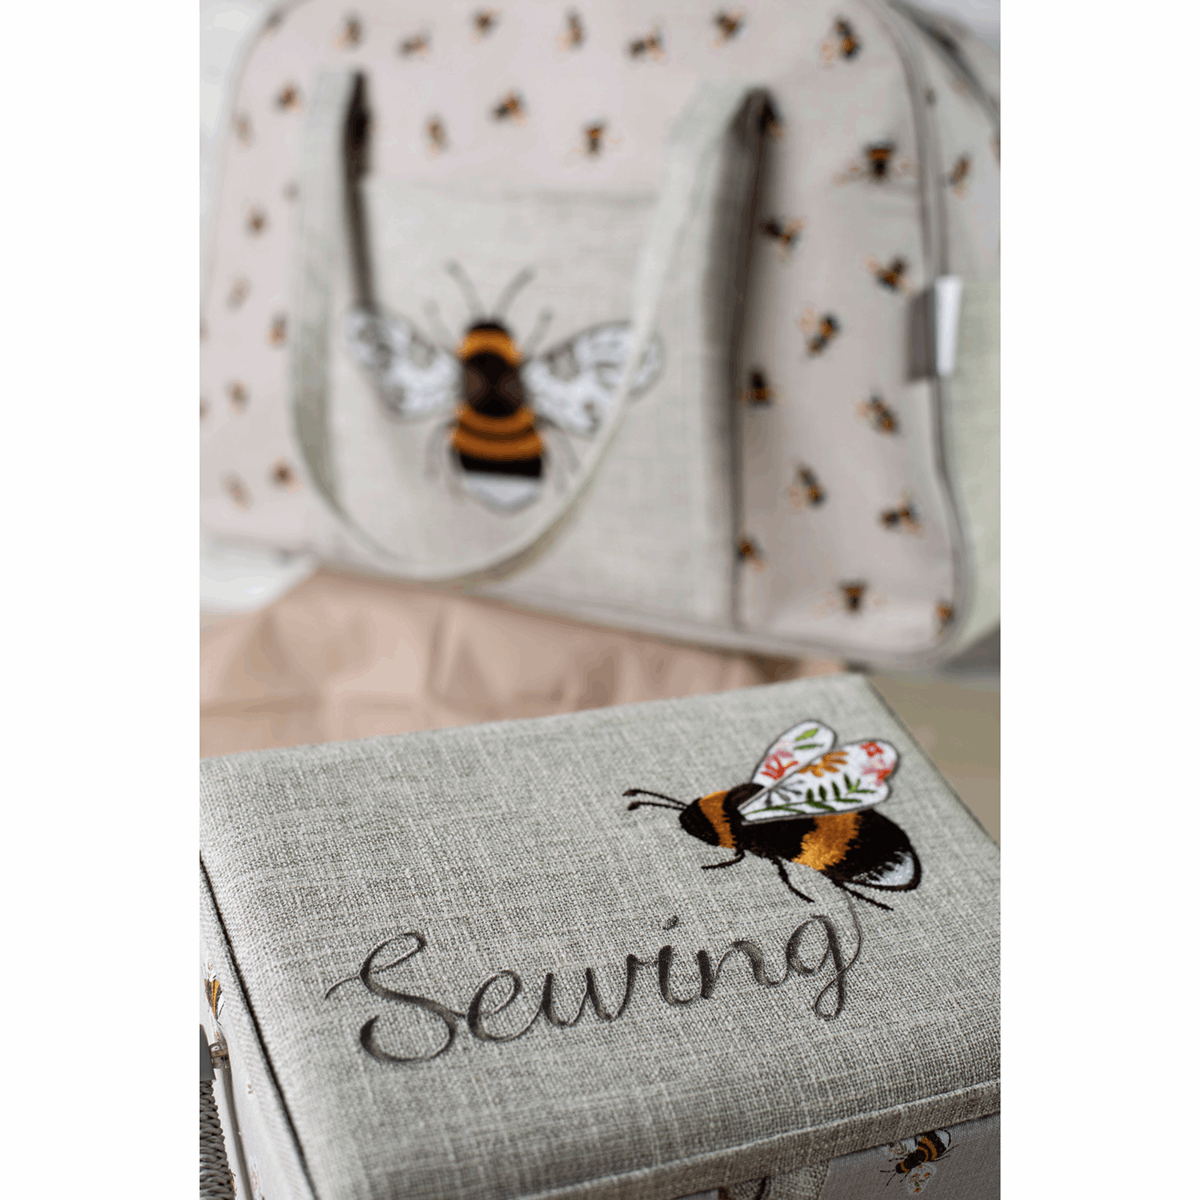 Embroidered Bee Sewing Machine Bag